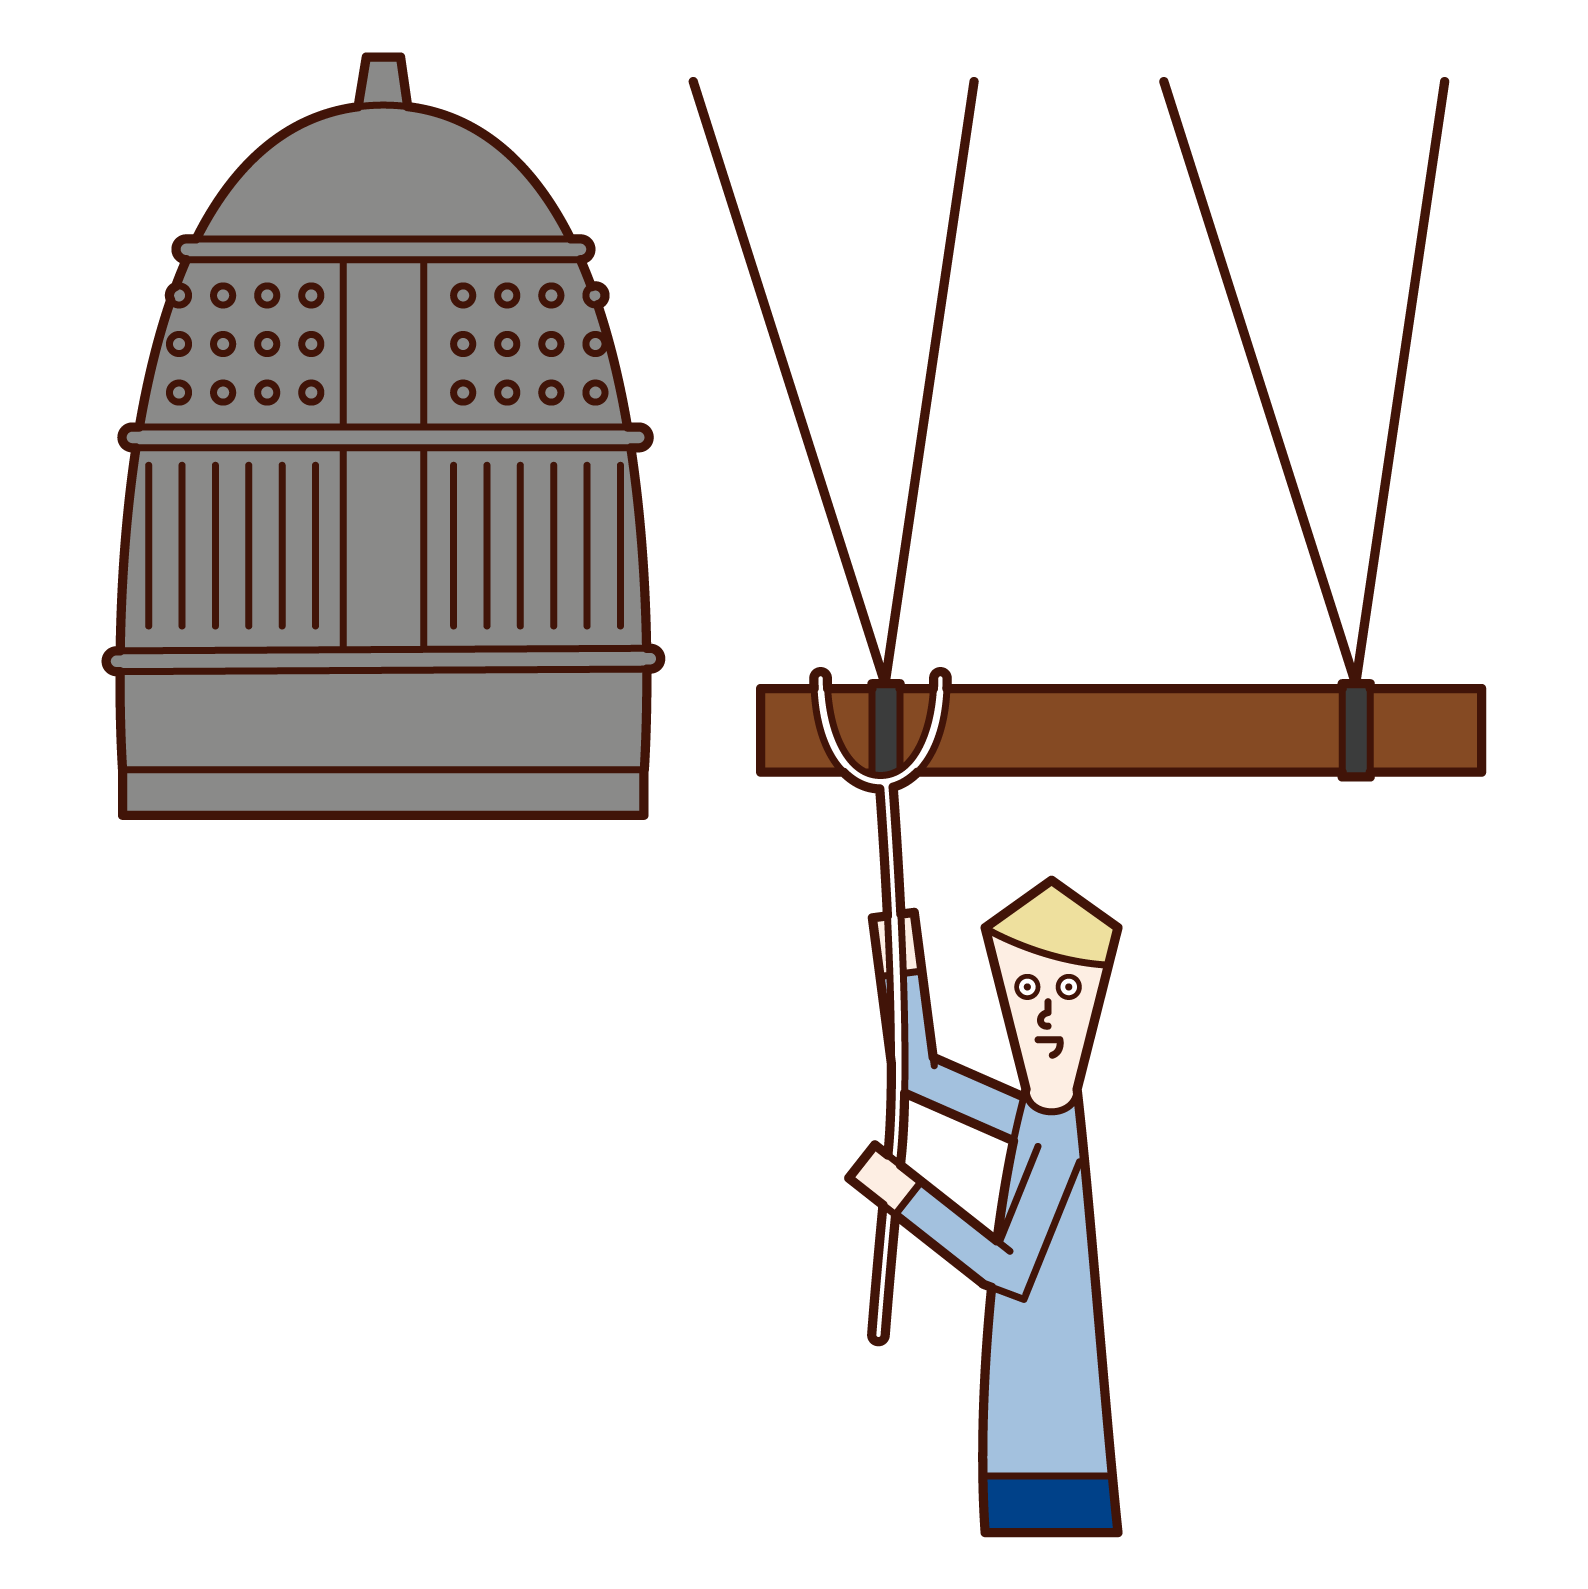 Illustration of a man ringing a temple bell